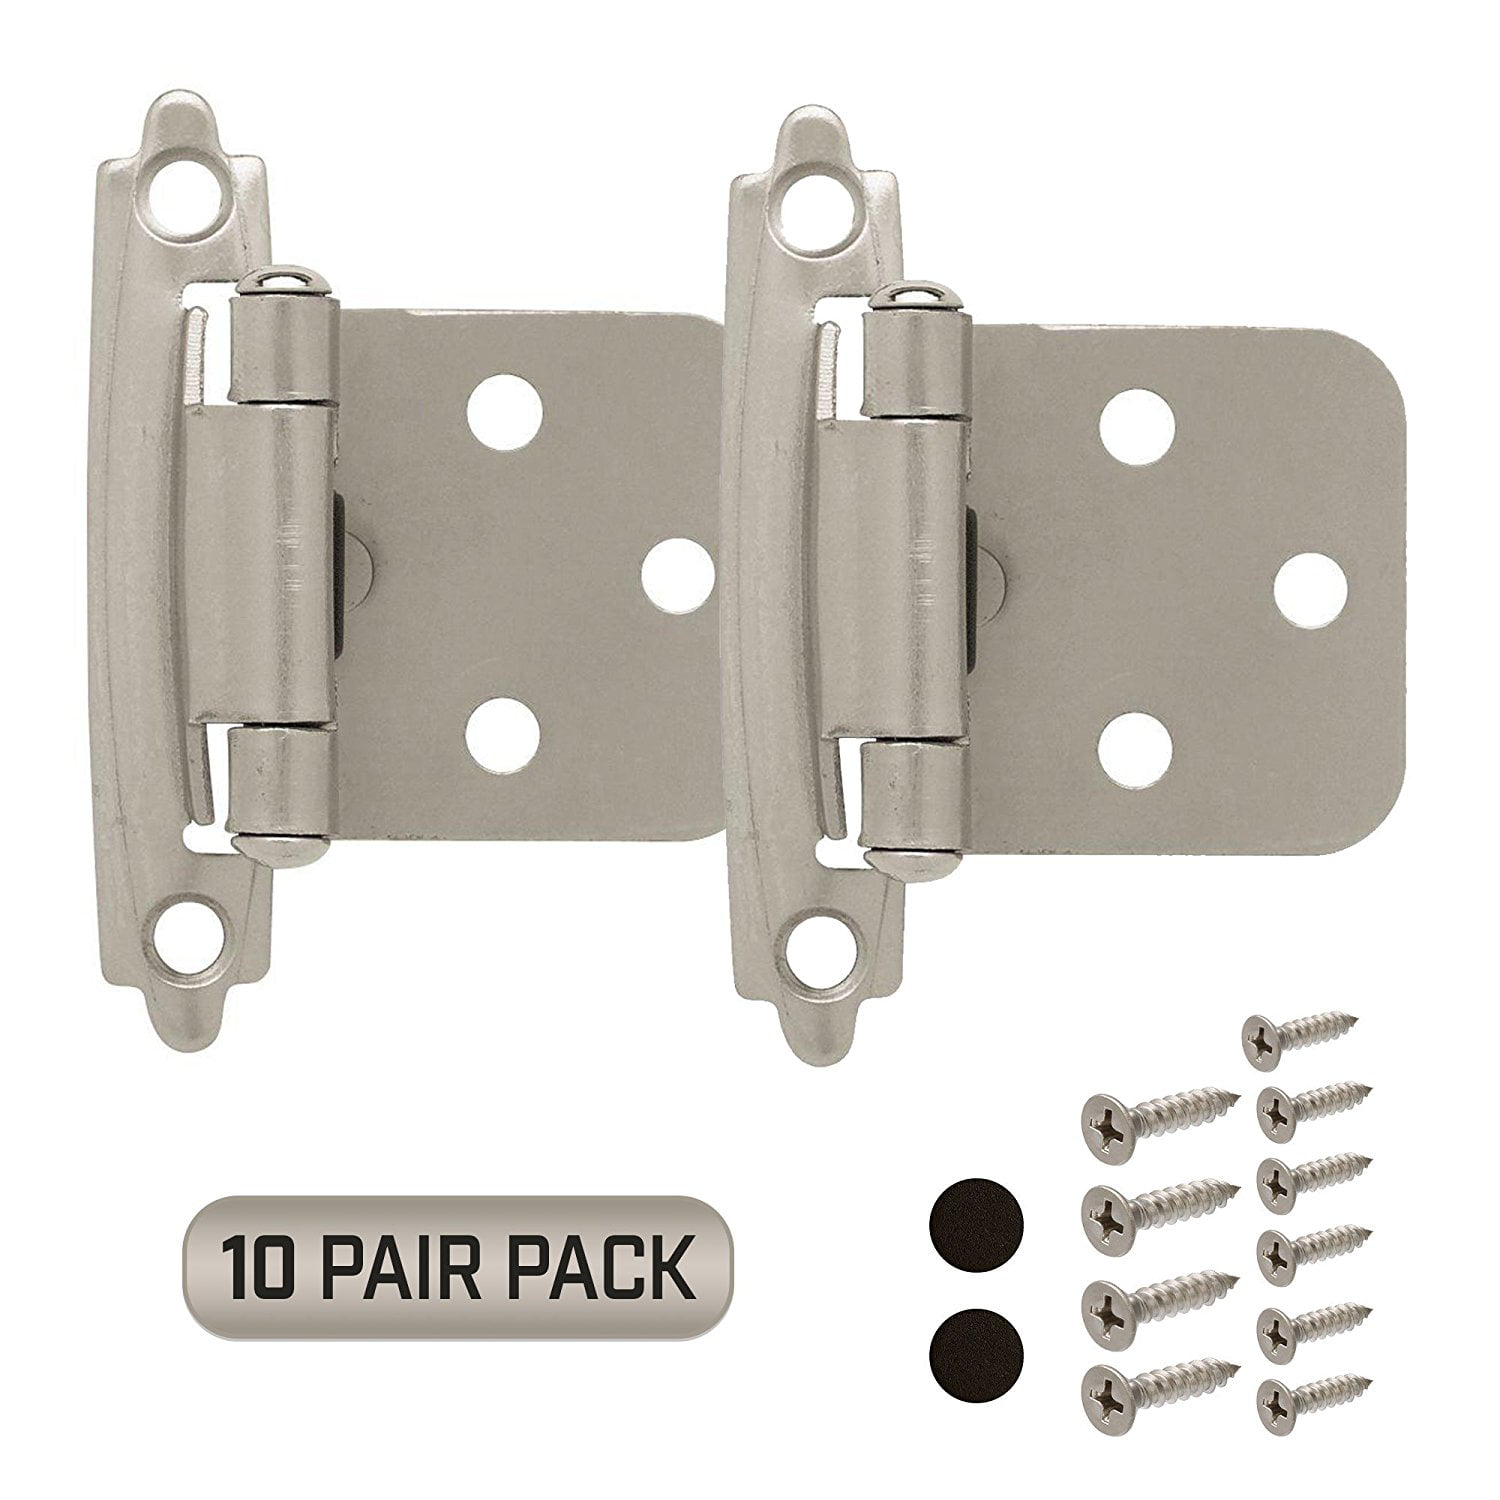 Satin Nickel Self Closing Overlay Cabinet Hinges with Stainless Steel Screw 12 Pack Hinges for Kitchen Cabinets